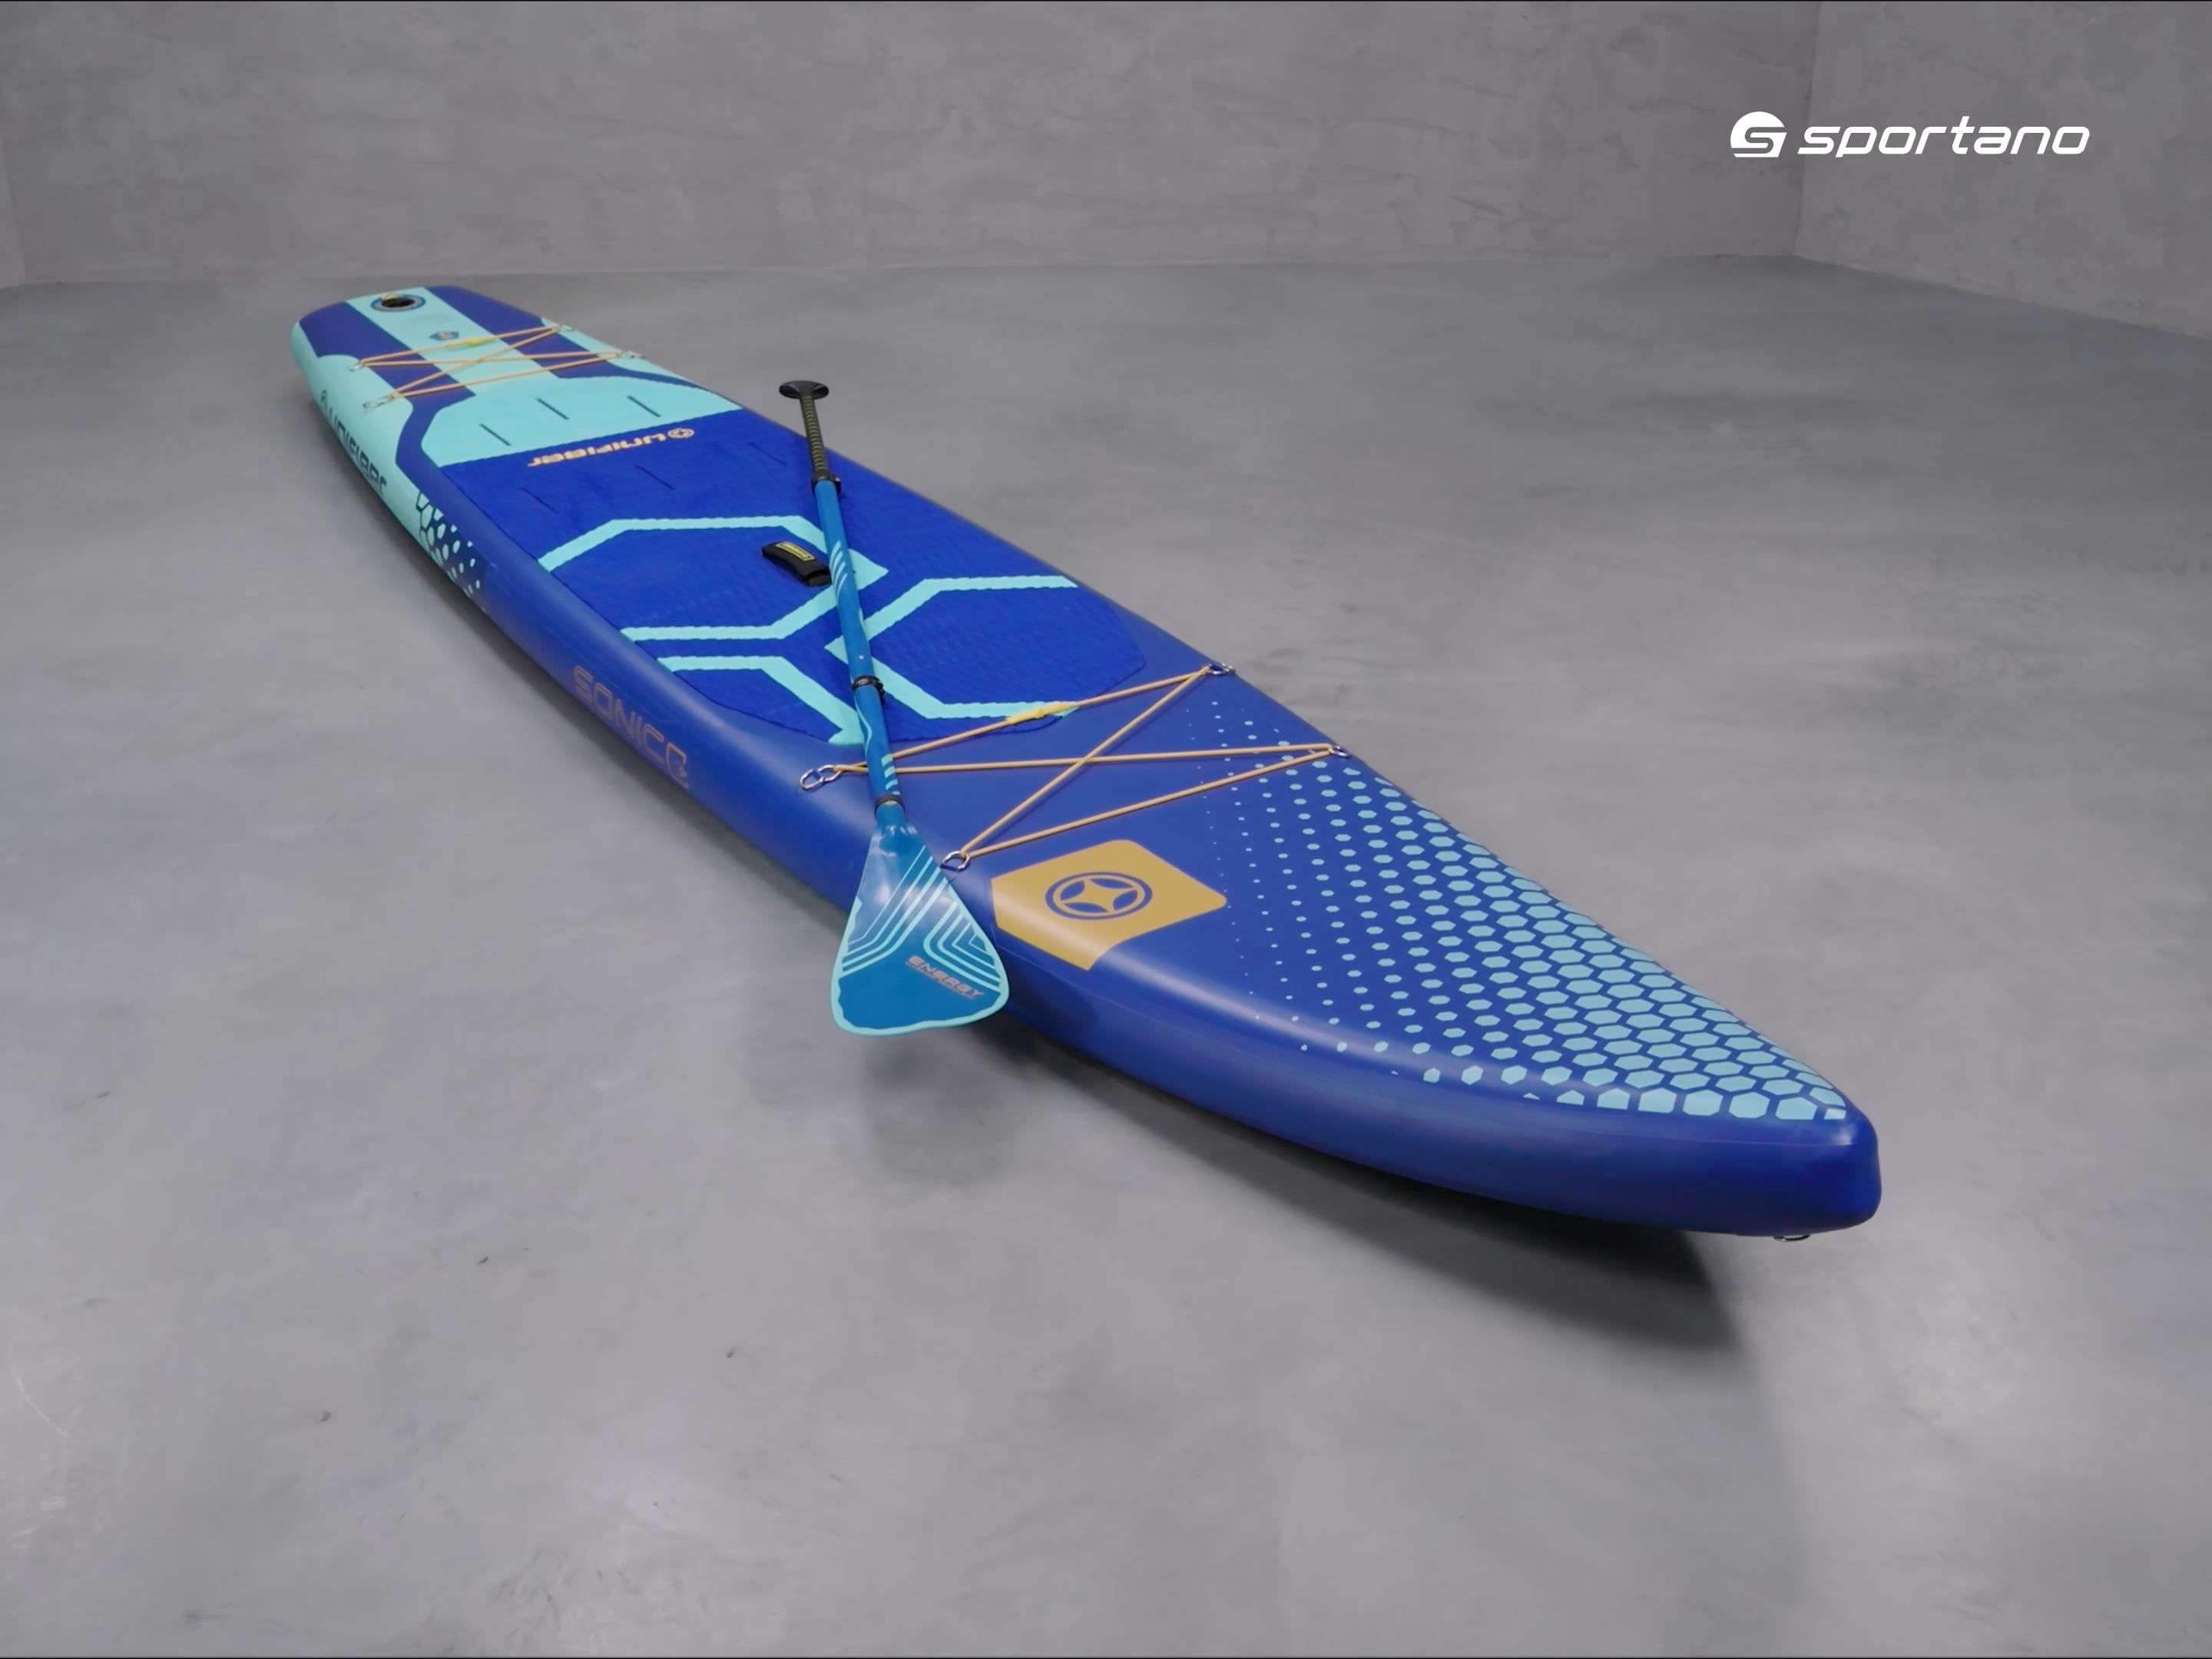 Unifiber Sonic Touring iSup 12'6'' FCD blue SUP board UF900100260